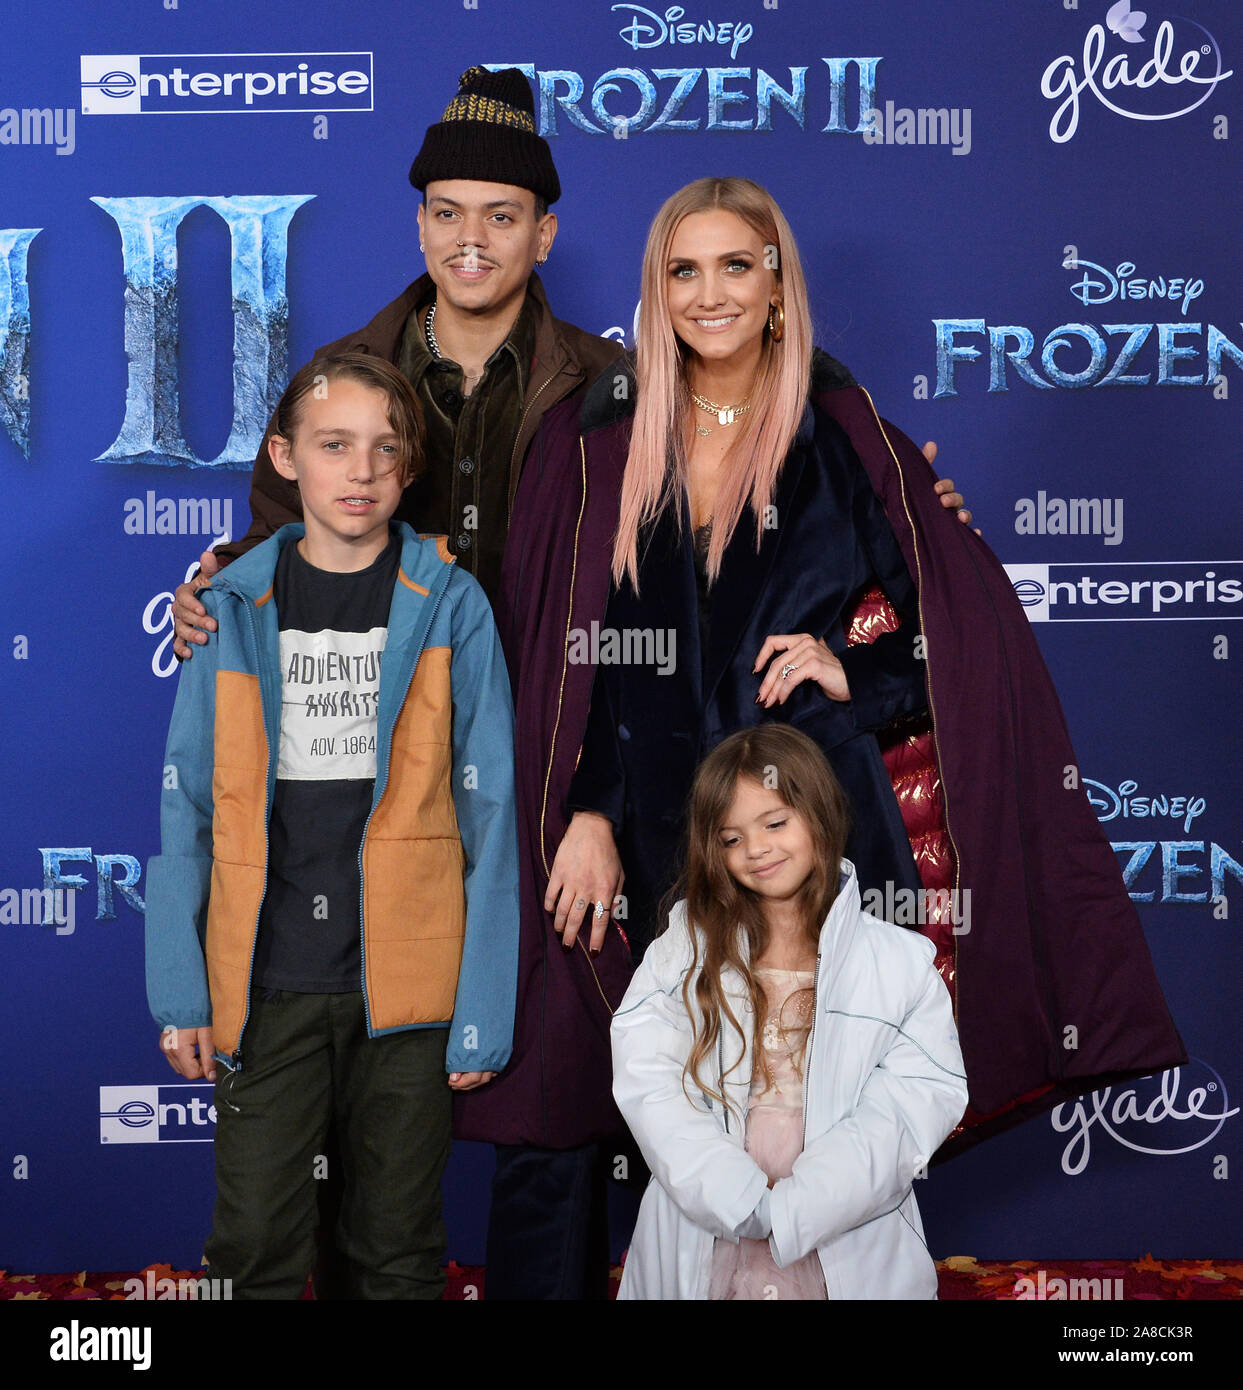 Los Angeles, United States. 07th Nov, 2019. Ashlee Simpson and her husband Evan Ross pose with their daughter Jagger Snow Ross and her son Bronx Wentz during the premiere of the animated musical comedy 'Frozen II' premiere at the Dolby Theatre in the Hollywood section of Los Angeles on Thursday, November 7, 2019. Storyline: Anna, Elsa, Kristoff, Olaf and Sven leave Arendelle to travel to an ancient, autumn-bound forest of an enchanted land. They set out to find the origin of Elsa's powers in order to save their kingdom. Photo by Jim Ruymen/UPI Credit: UPI/Alamy Live News Stock Photo